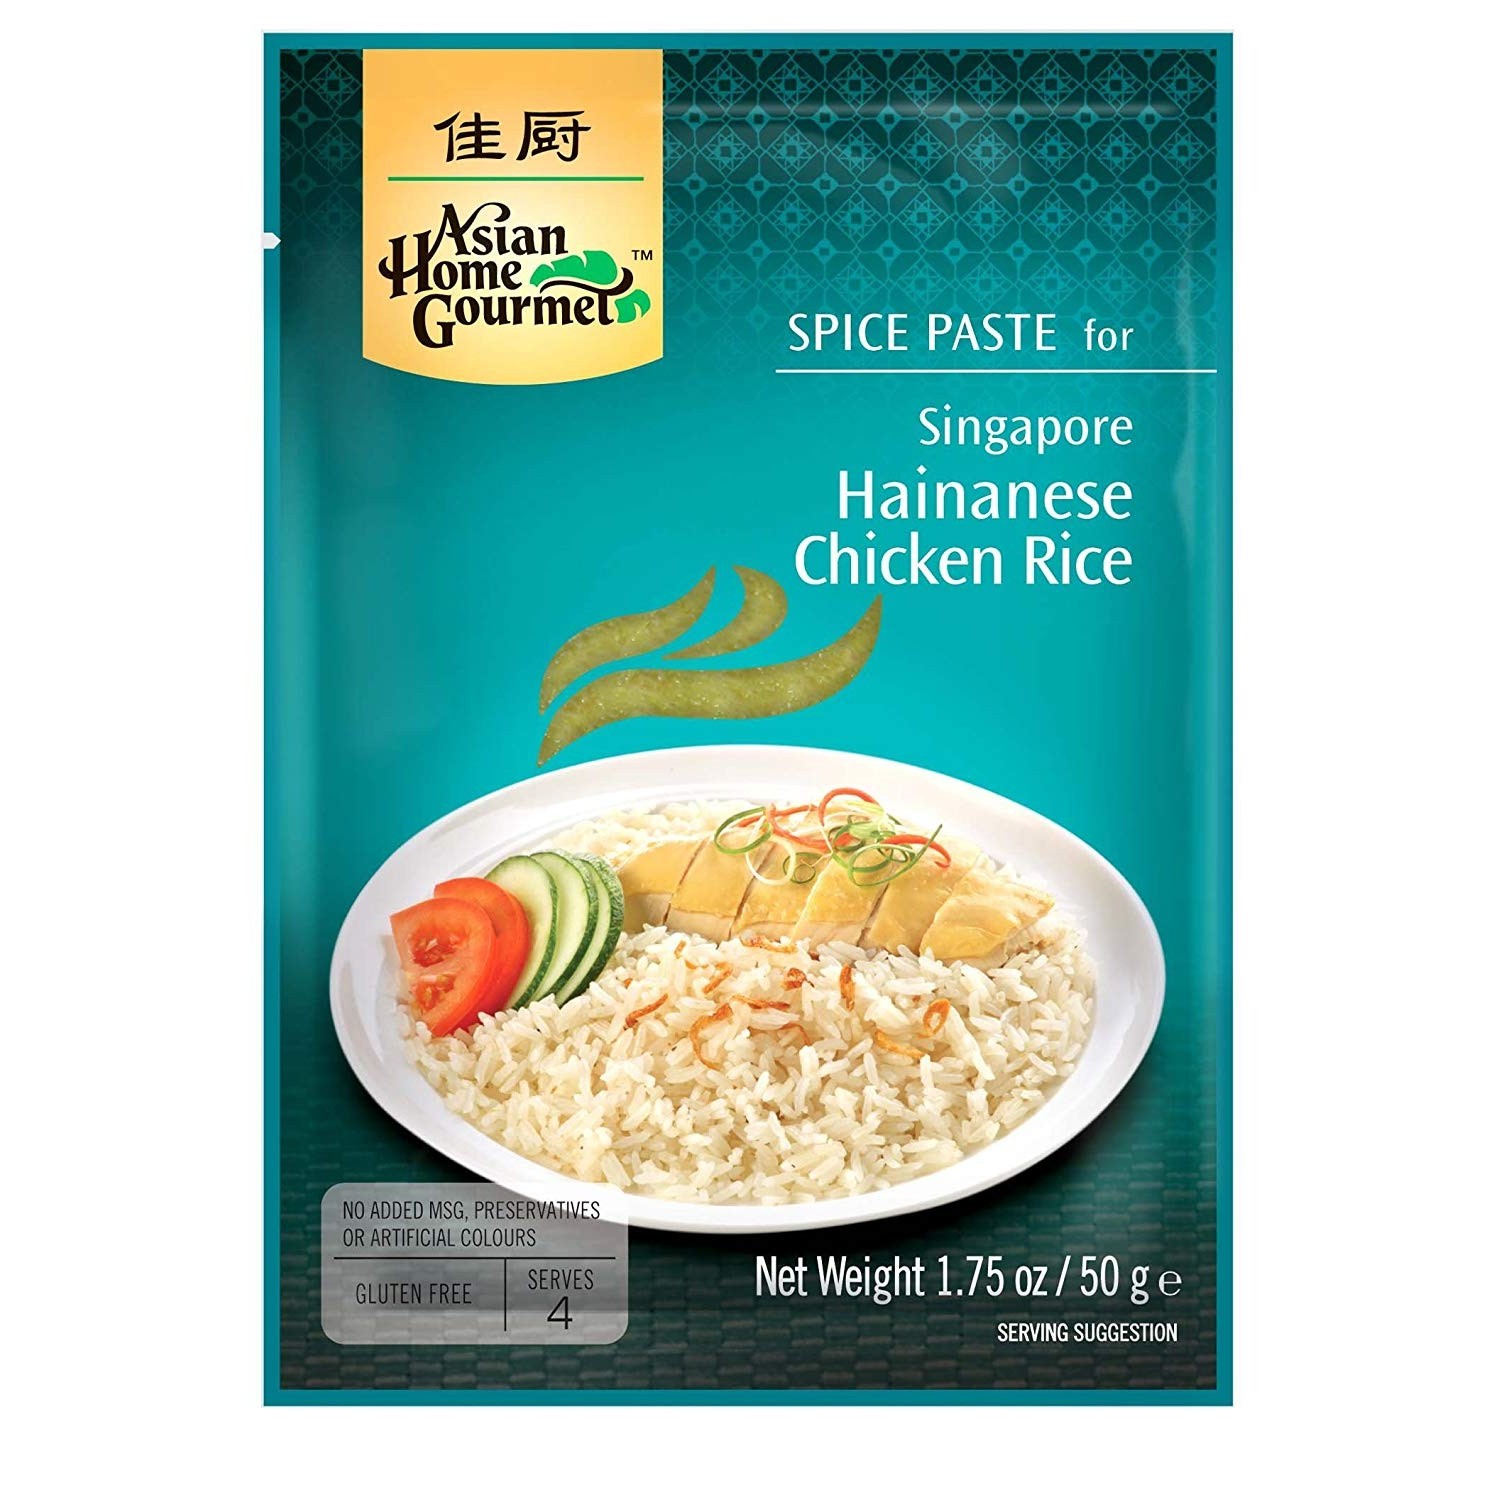 Spice Paste For Singapore Hainanese Chicken Rice - 0015205438206